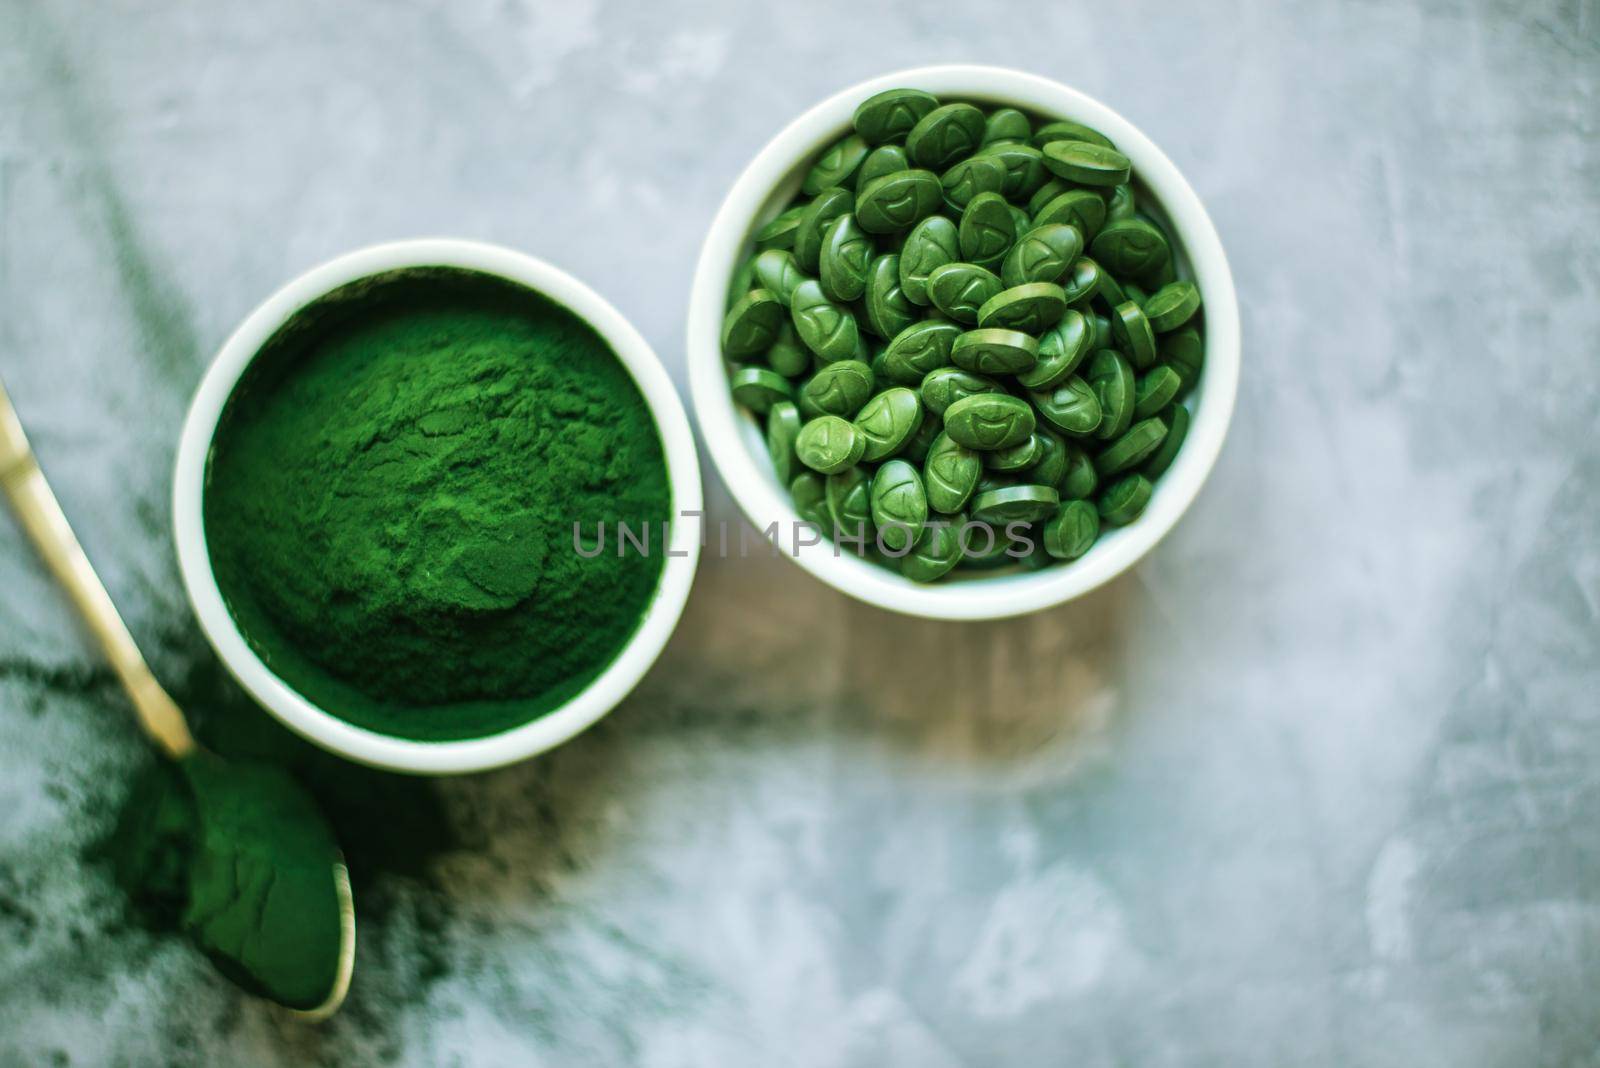 spirulina powder and tablets in white plates on concrete background by maramorosz